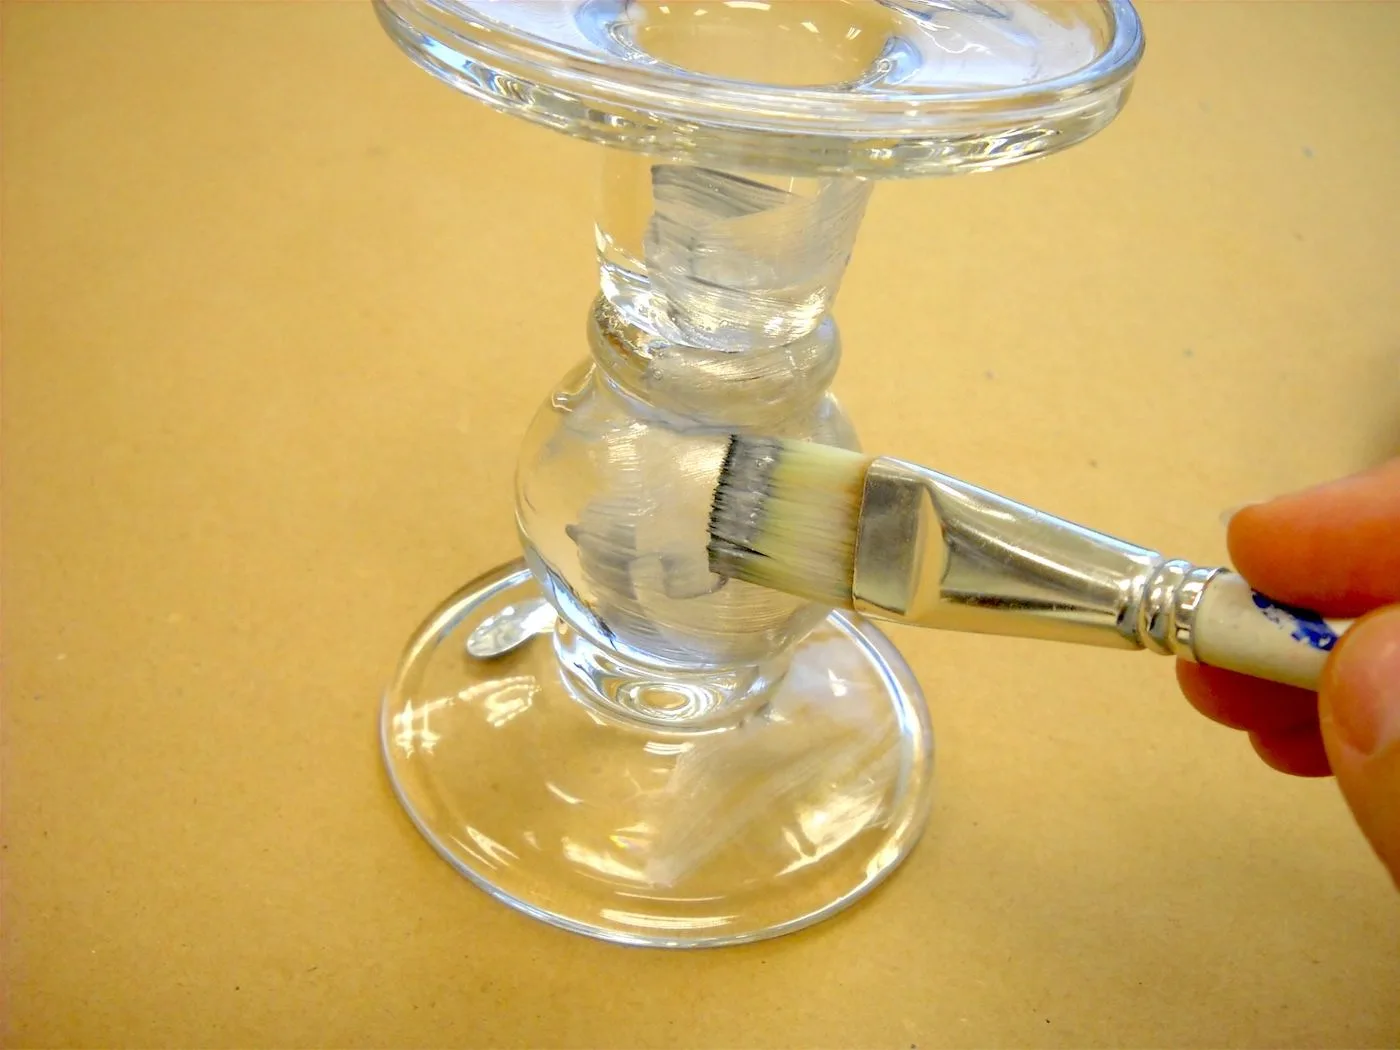 Painting the candle stick with glass paint